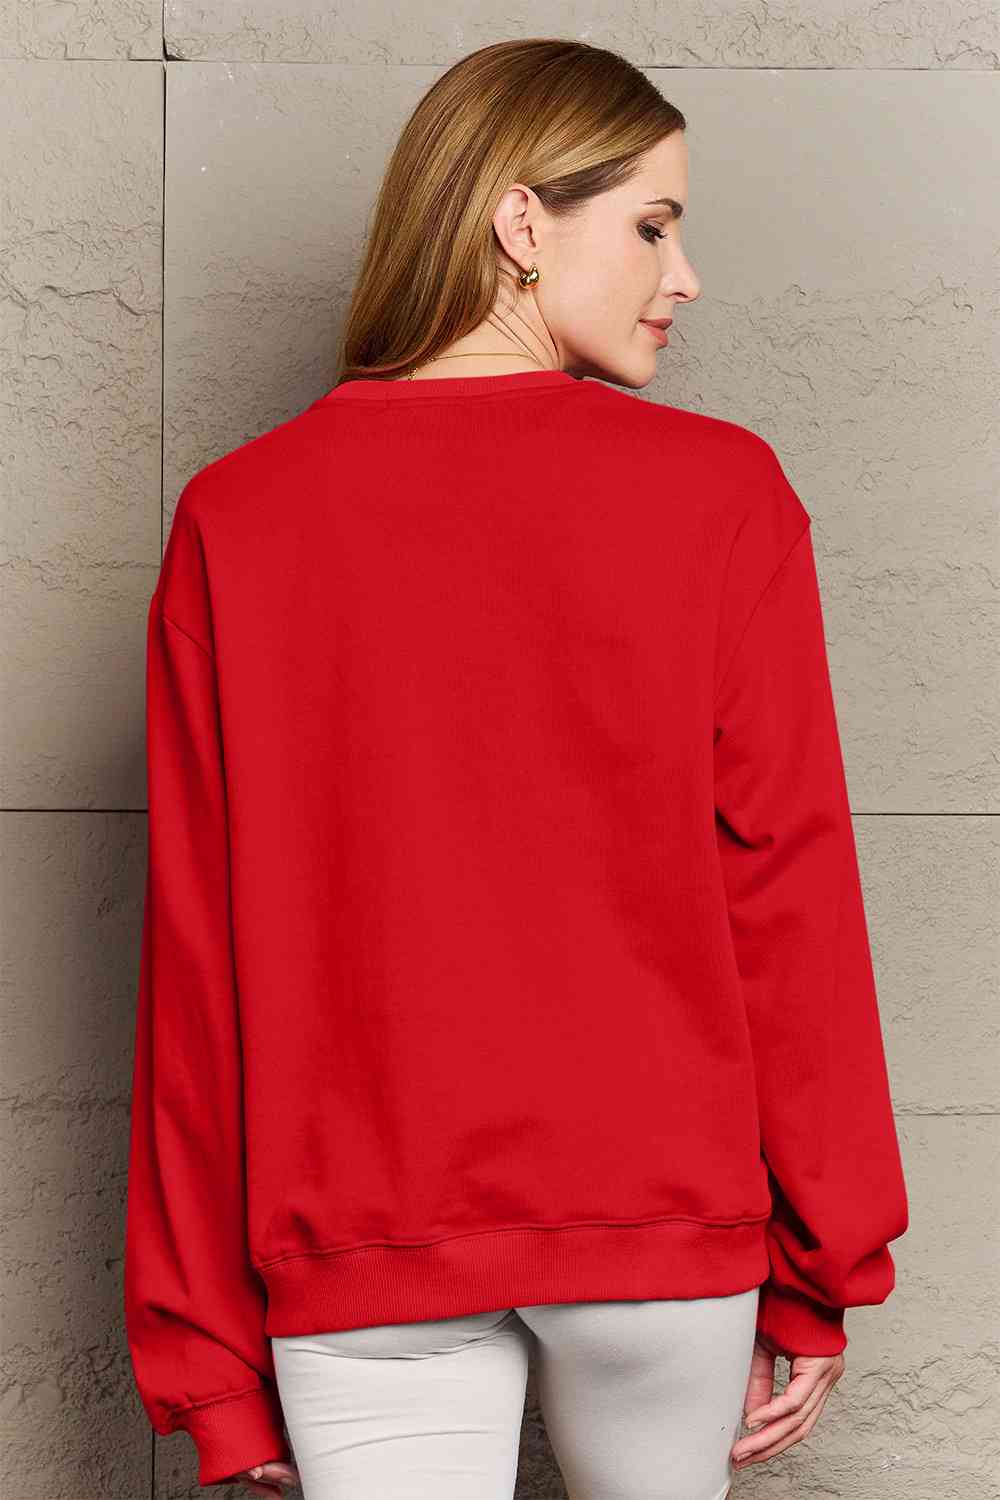 Firebrick Simply Love Full Size Graphic Long Sleeve Sweatshirt Sentient Beauty Fashions Apparel &amp; Accessories